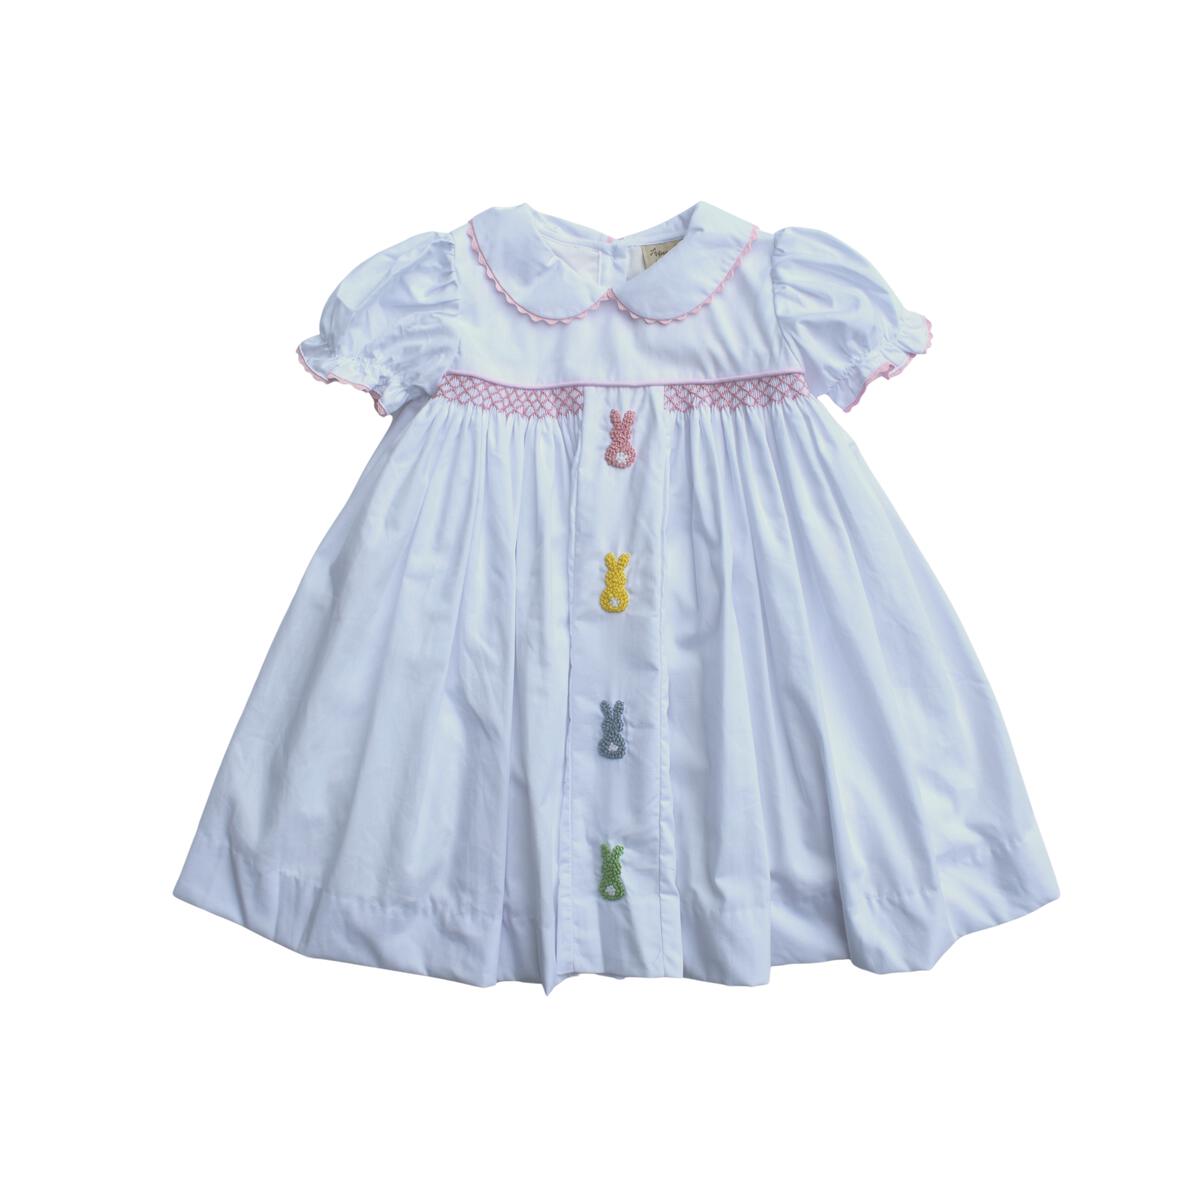 White girls Easter dress with pinpoint embroidered peep Easter bunnies and a smocked chest detail.